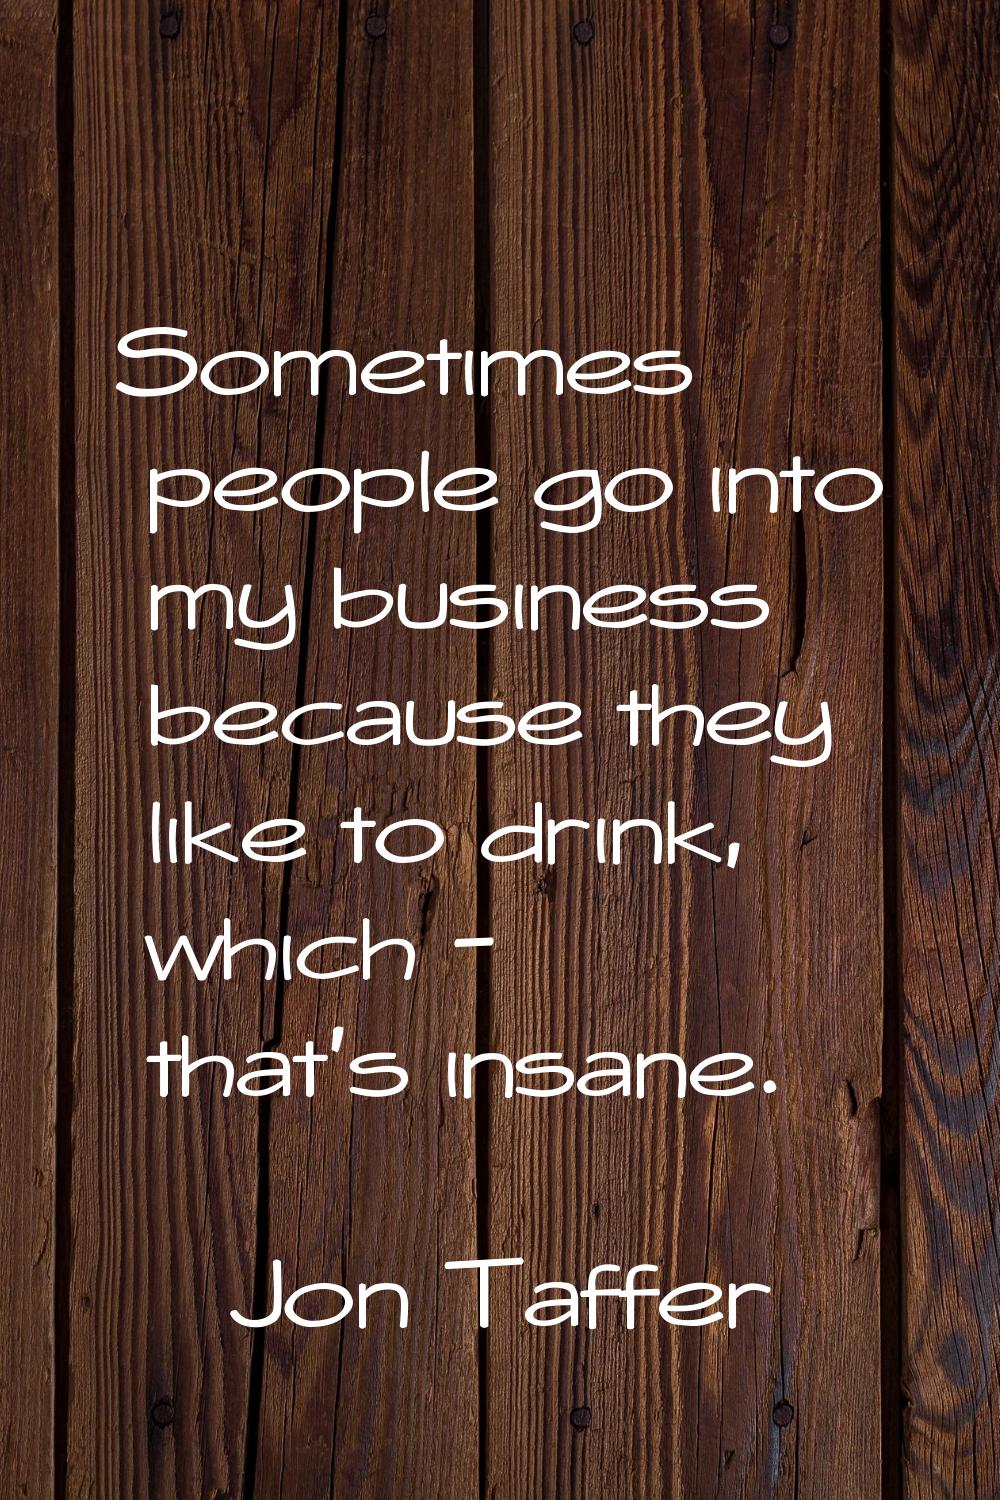 Sometimes people go into my business because they like to drink, which - that's insane.